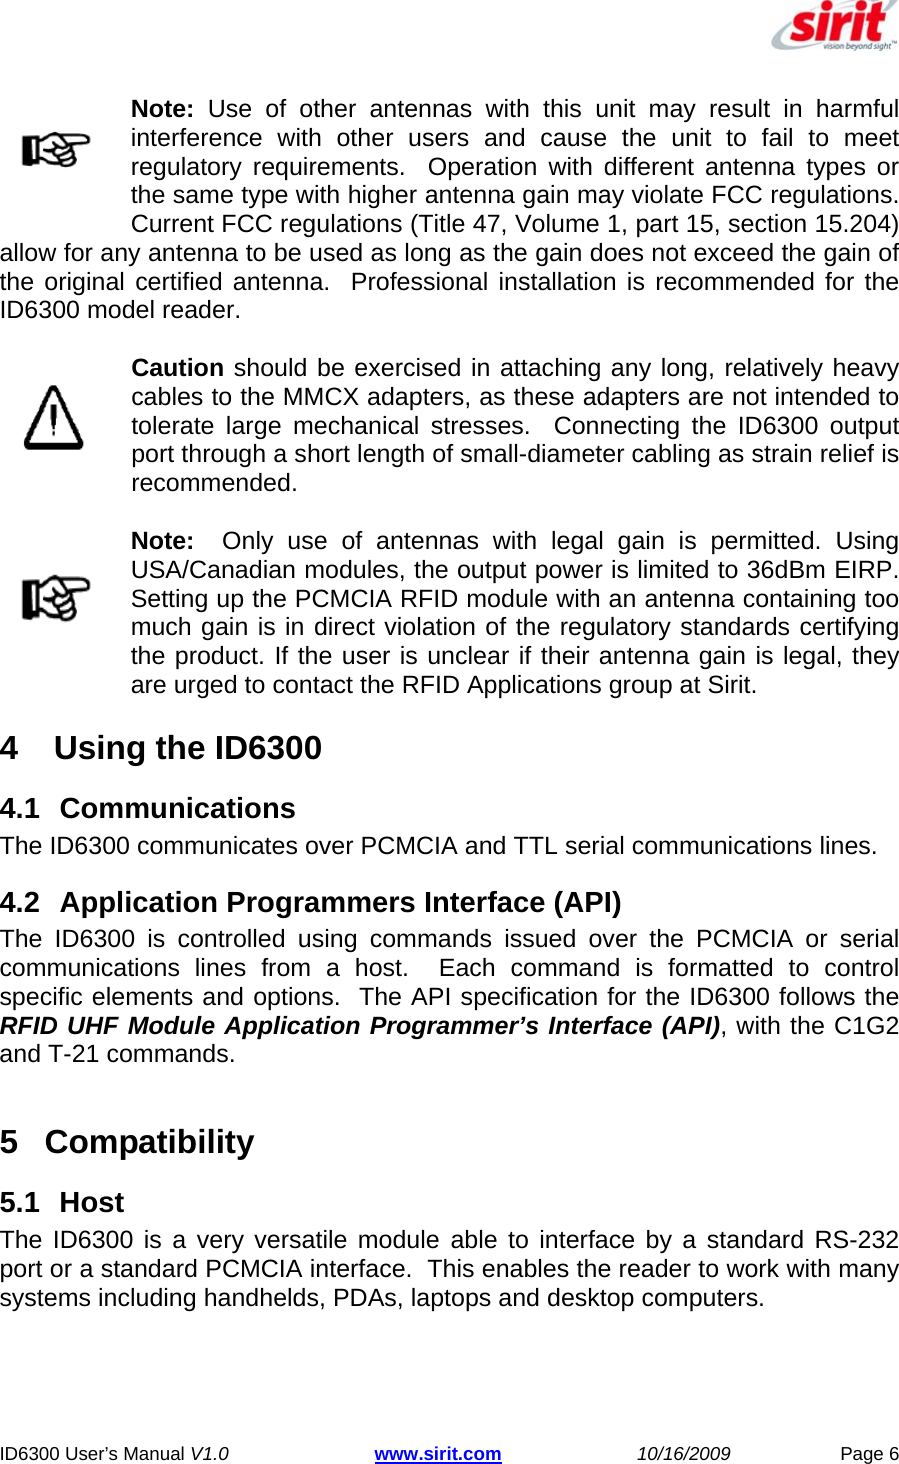   ID6300 User’s Manual V1.0 www.sirit.com 10/16/2009 Page 6  Note: Use of other antennas with this unit may result in harmful interference with other users and cause the unit to fail to meet regulatory requirements.  Operation with different antenna types or the same type with higher antenna gain may violate FCC regulations.  Current FCC regulations (Title 47, Volume 1, part 15, section 15.204) allow for any antenna to be used as long as the gain does not exceed the gain of the original certified antenna.  Professional installation is recommended for the ID6300 model reader. Caution should be exercised in attaching any long, relatively heavy cables to the MMCX adapters, as these adapters are not intended to tolerate large mechanical stresses.  Connecting the ID6300 output port through a short length of small-diameter cabling as strain relief is recommended. Note:  Only use of antennas with legal gain is permitted. Using USA/Canadian modules, the output power is limited to 36dBm EIRP. Setting up the PCMCIA RFID module with an antenna containing too much gain is in direct violation of the regulatory standards certifying the product. If the user is unclear if their antenna gain is legal, they are urged to contact the RFID Applications group at Sirit. 4   Using the ID6300 4.1 Communications The ID6300 communicates over PCMCIA and TTL serial communications lines. 4.2  Application Programmers Interface (API) The ID6300 is controlled using commands issued over the PCMCIA or serial communications lines from a host.  Each command is formatted to control specific elements and options.  The API specification for the ID6300 follows the RFID UHF Module Application Programmer’s Interface (API), with the C1G2 and T-21 commands.  5 Compatibility 5.1 Host The ID6300 is a very versatile module able to interface by a standard RS-232 port or a standard PCMCIA interface.  This enables the reader to work with many systems including handhelds, PDAs, laptops and desktop computers. 